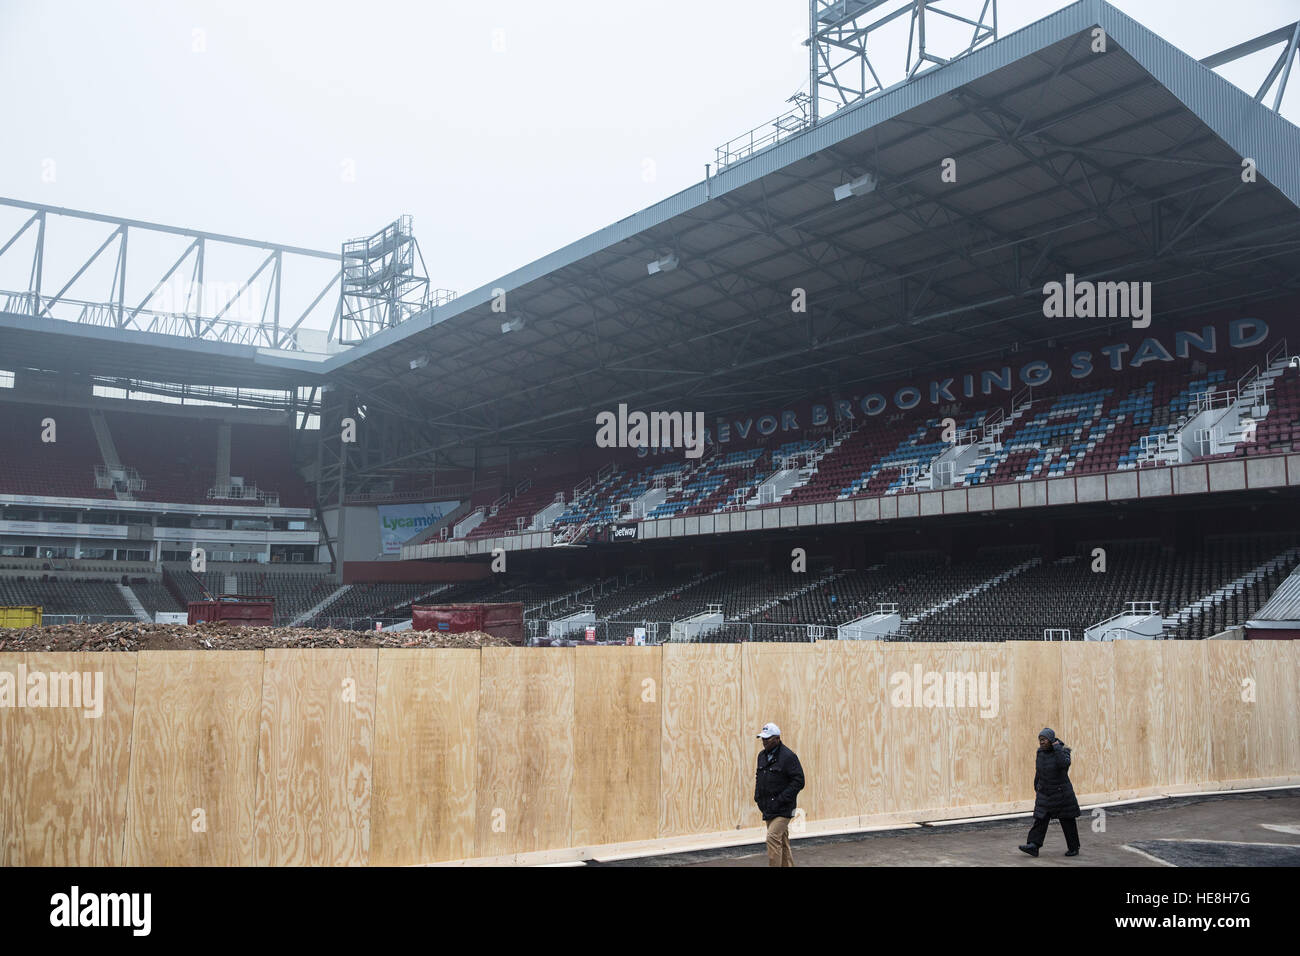 London, UK. 17th December, 2016. The East Stand at West Ham ...